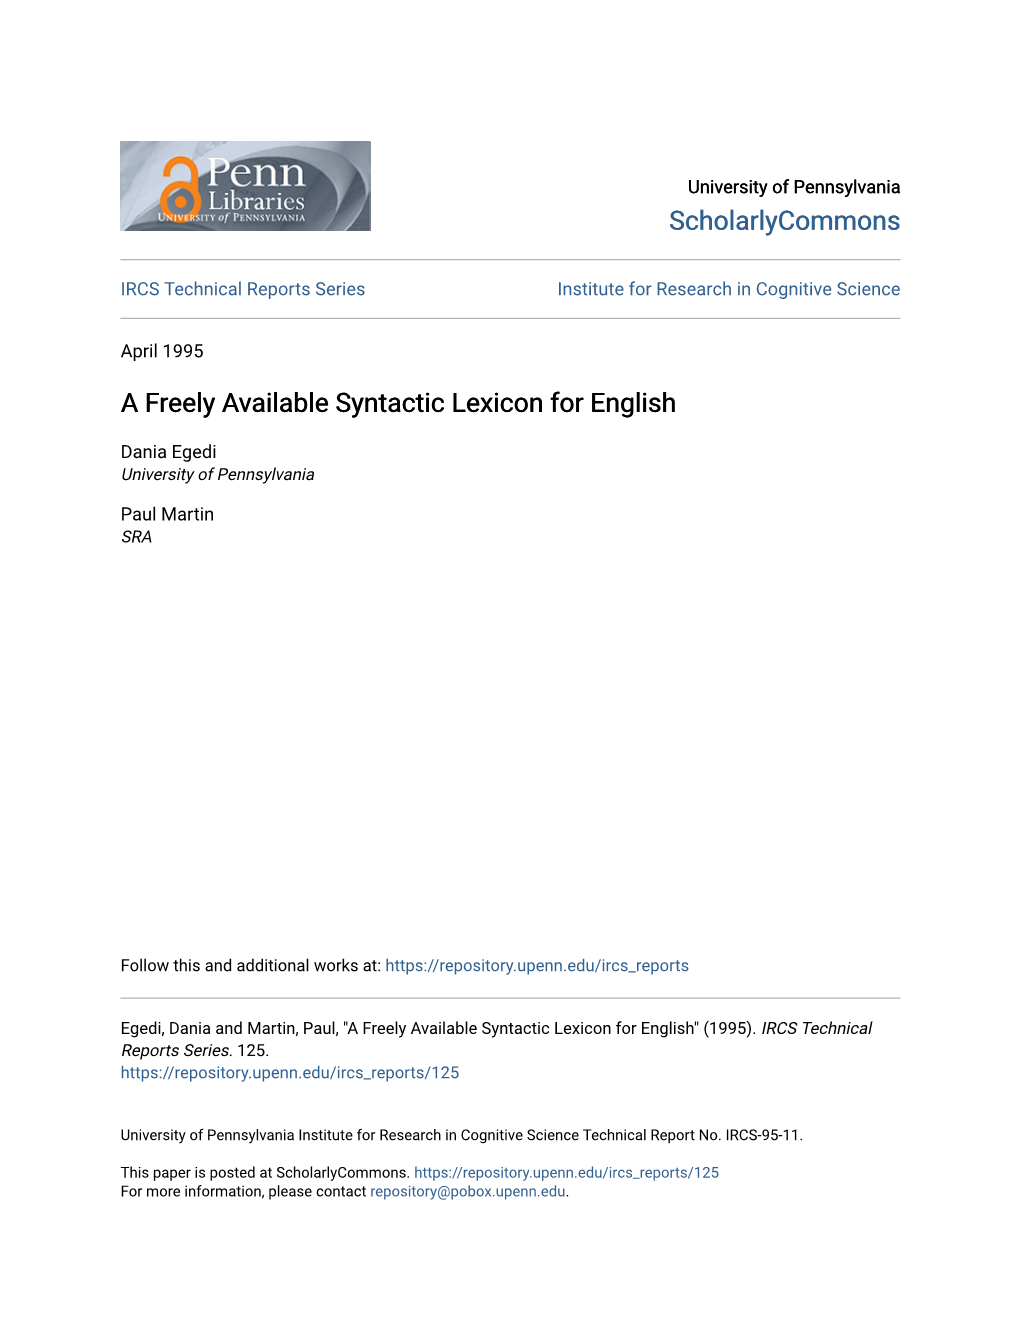 A Freely Available Syntactic Lexicon for English